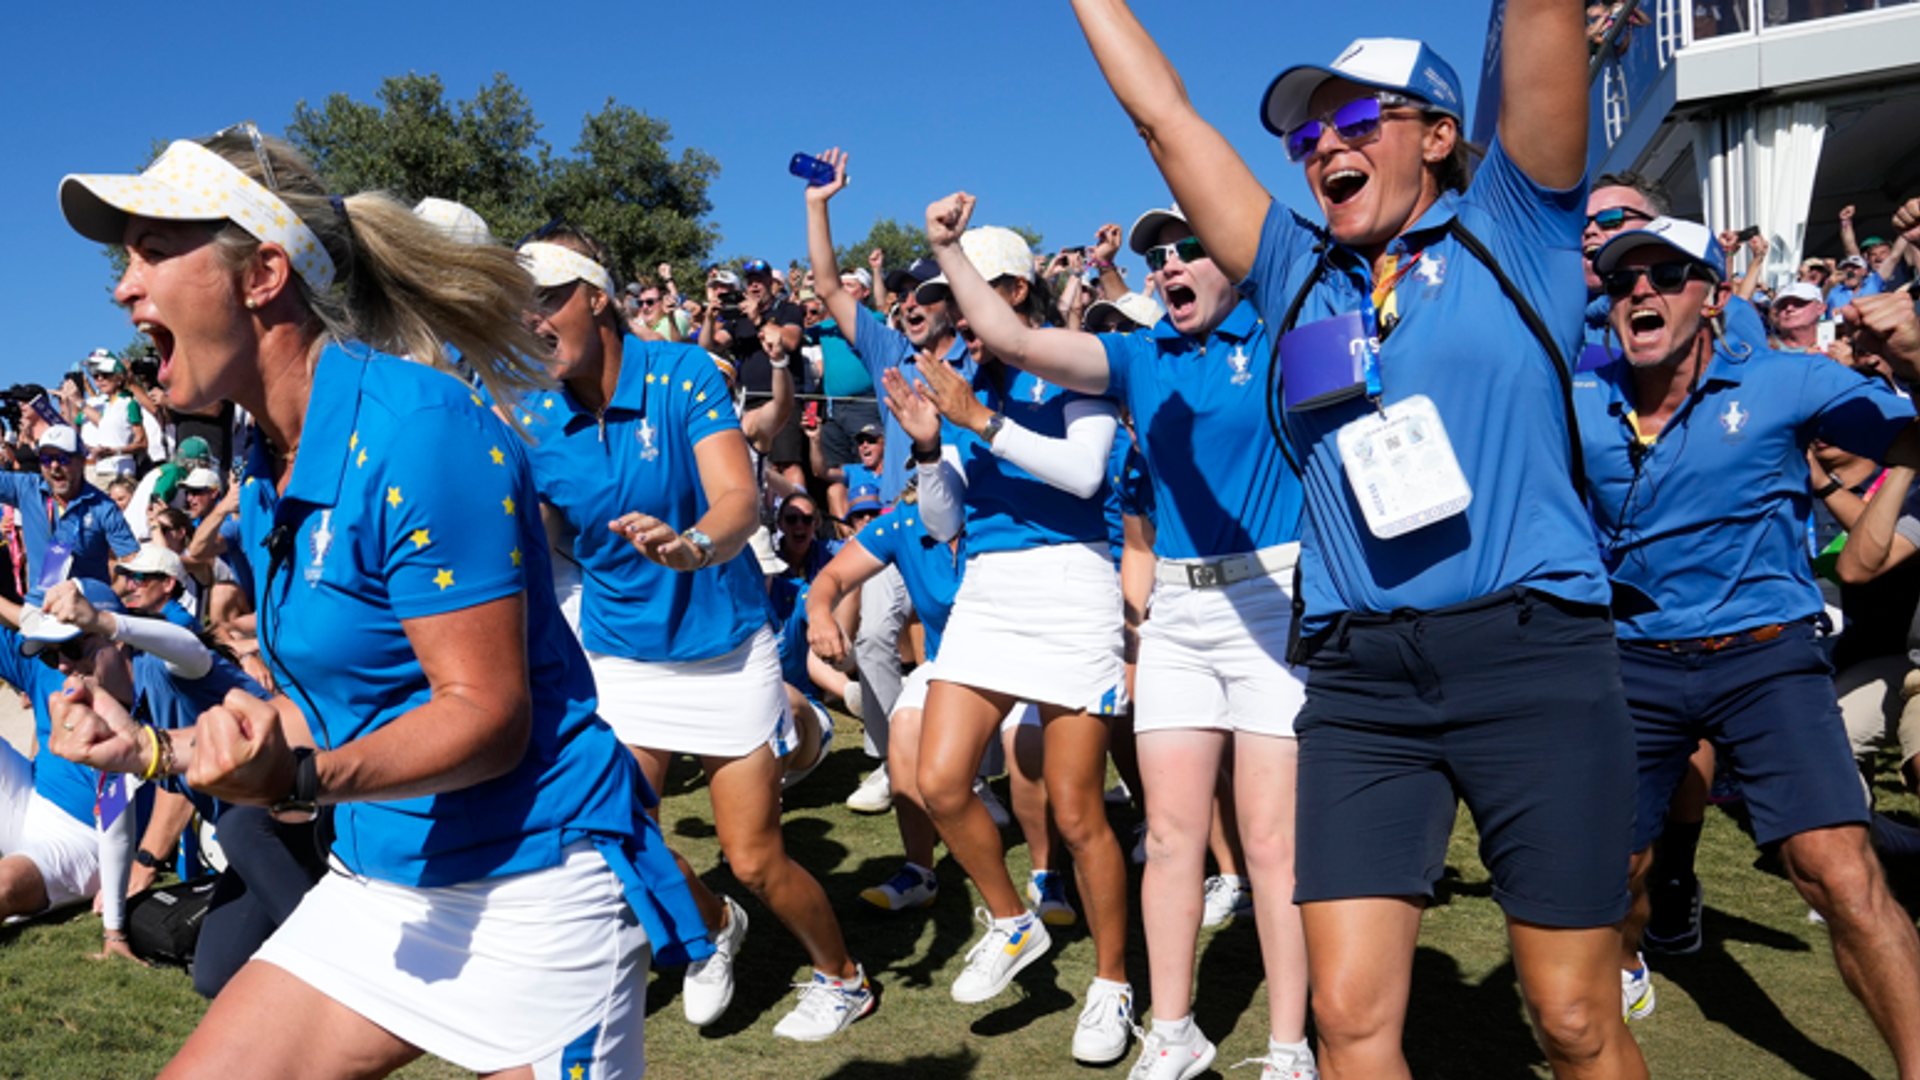 Solheim Cup notebook: Hedwall the hero in 'spectacular' finish